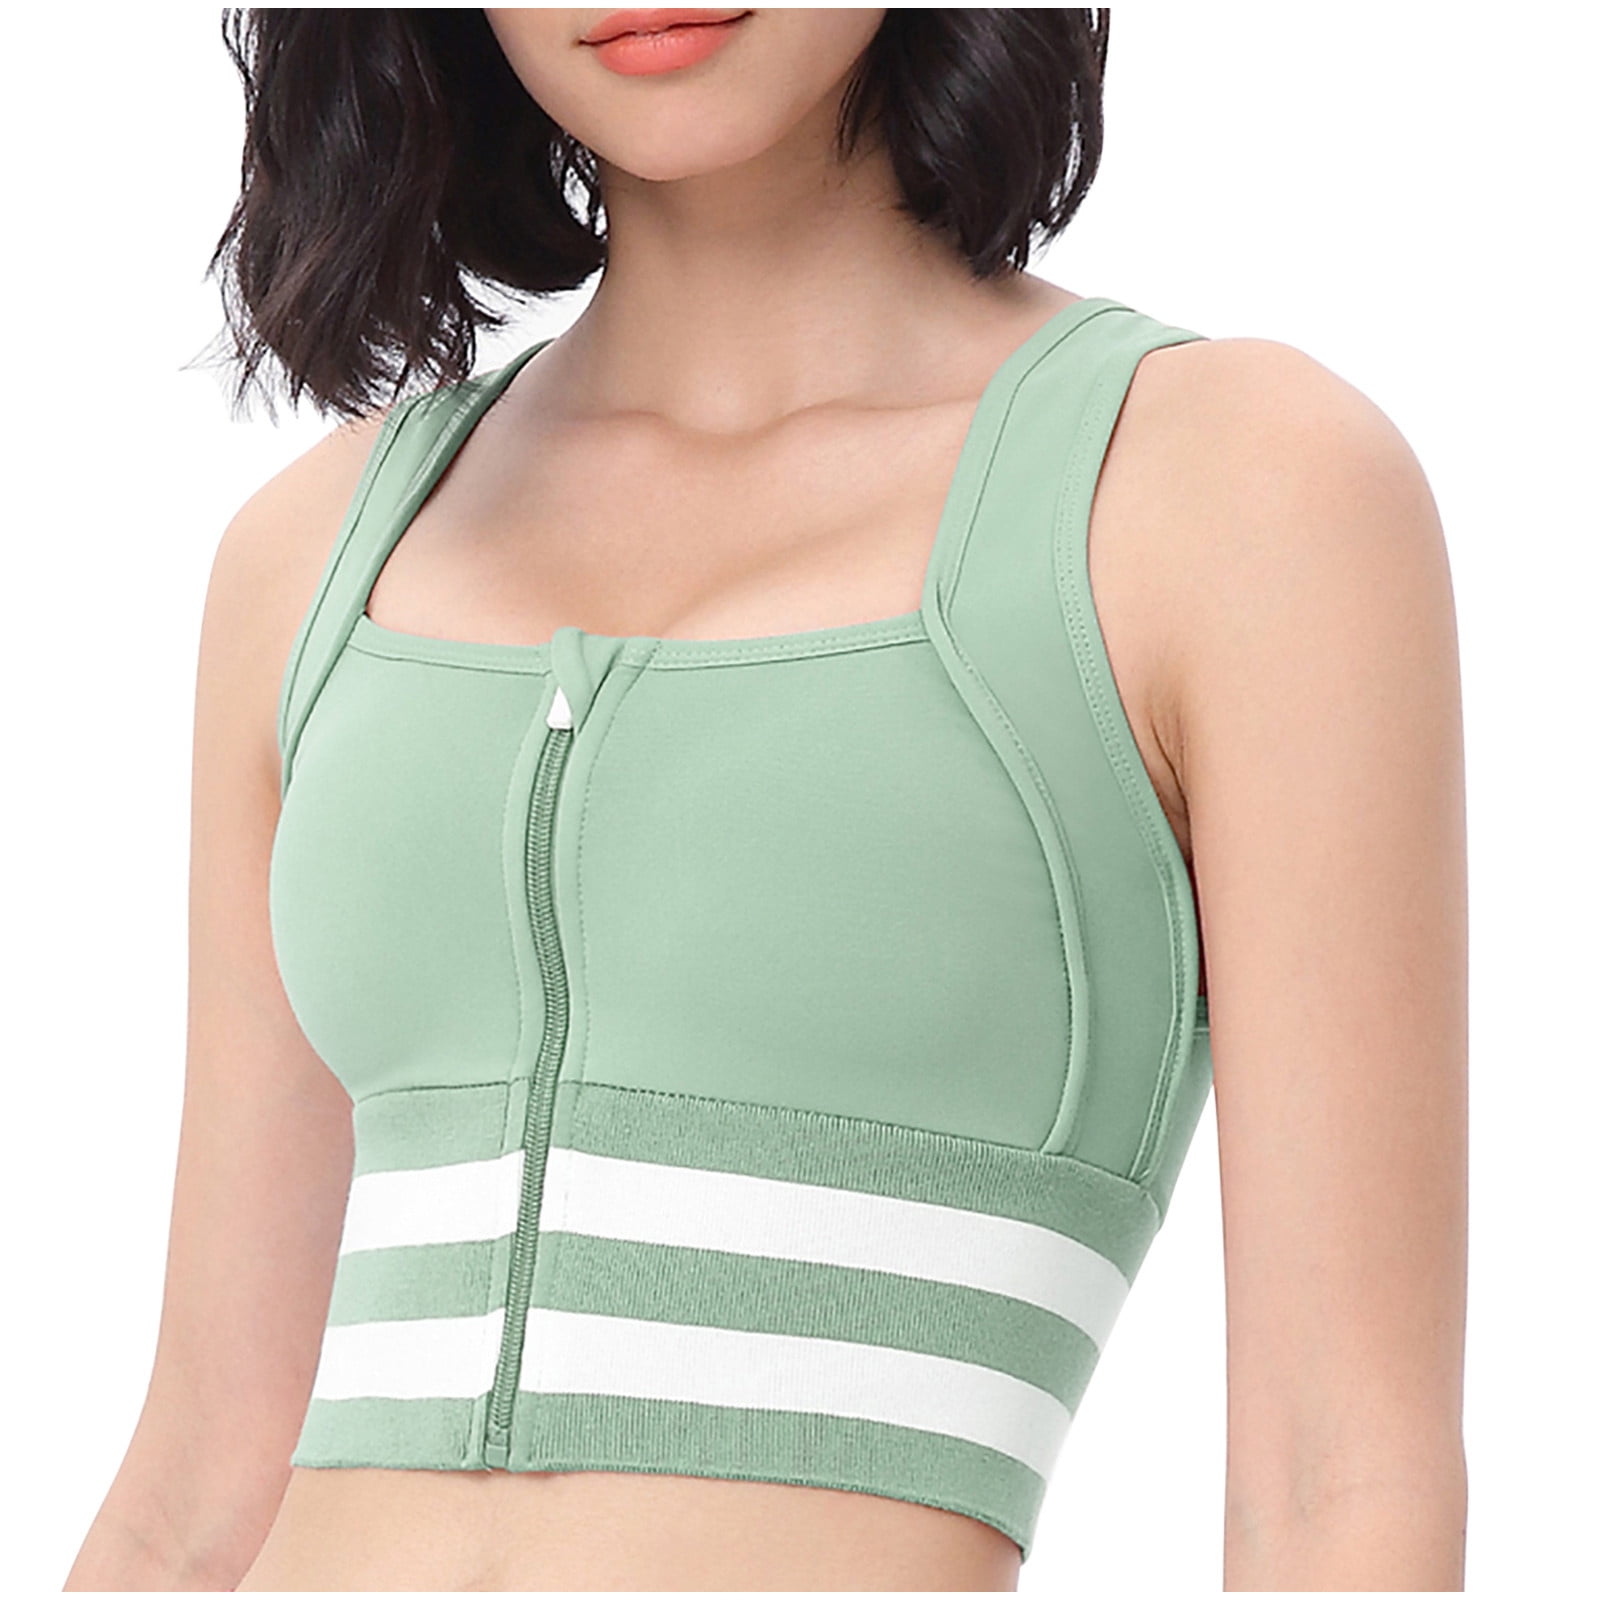 Breathable Solid Color Yoga Bra For Women Slim Fit Aldi Sports Bra With  Sweat And Wicking Features Ideal Fitness Vest And Lingerie Underwear From  Mayingclothes88, $13.01